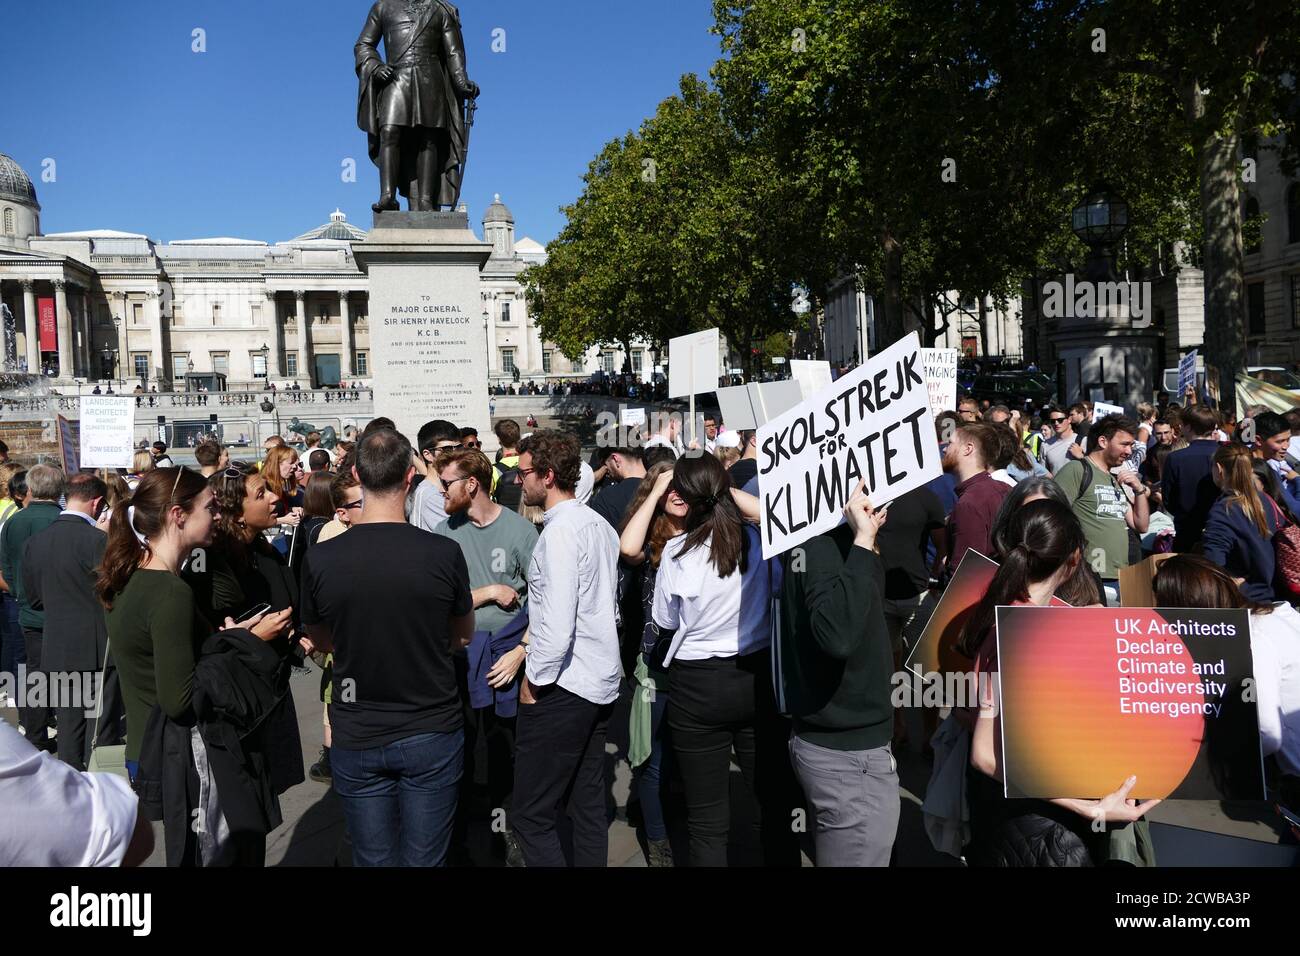 Protesters march in Trafalgar Square, London, during the 20th September 2019 climate strike. Also known as the Global Week for Future, a series of international strikes and protests to demand action be taken to address climate change. The 20 September protests were likely the largest climate strikes in world history. Organisers reported that over 4 million people participated in strikes worldwide, including 300000 people joined UK protests Stock Photo